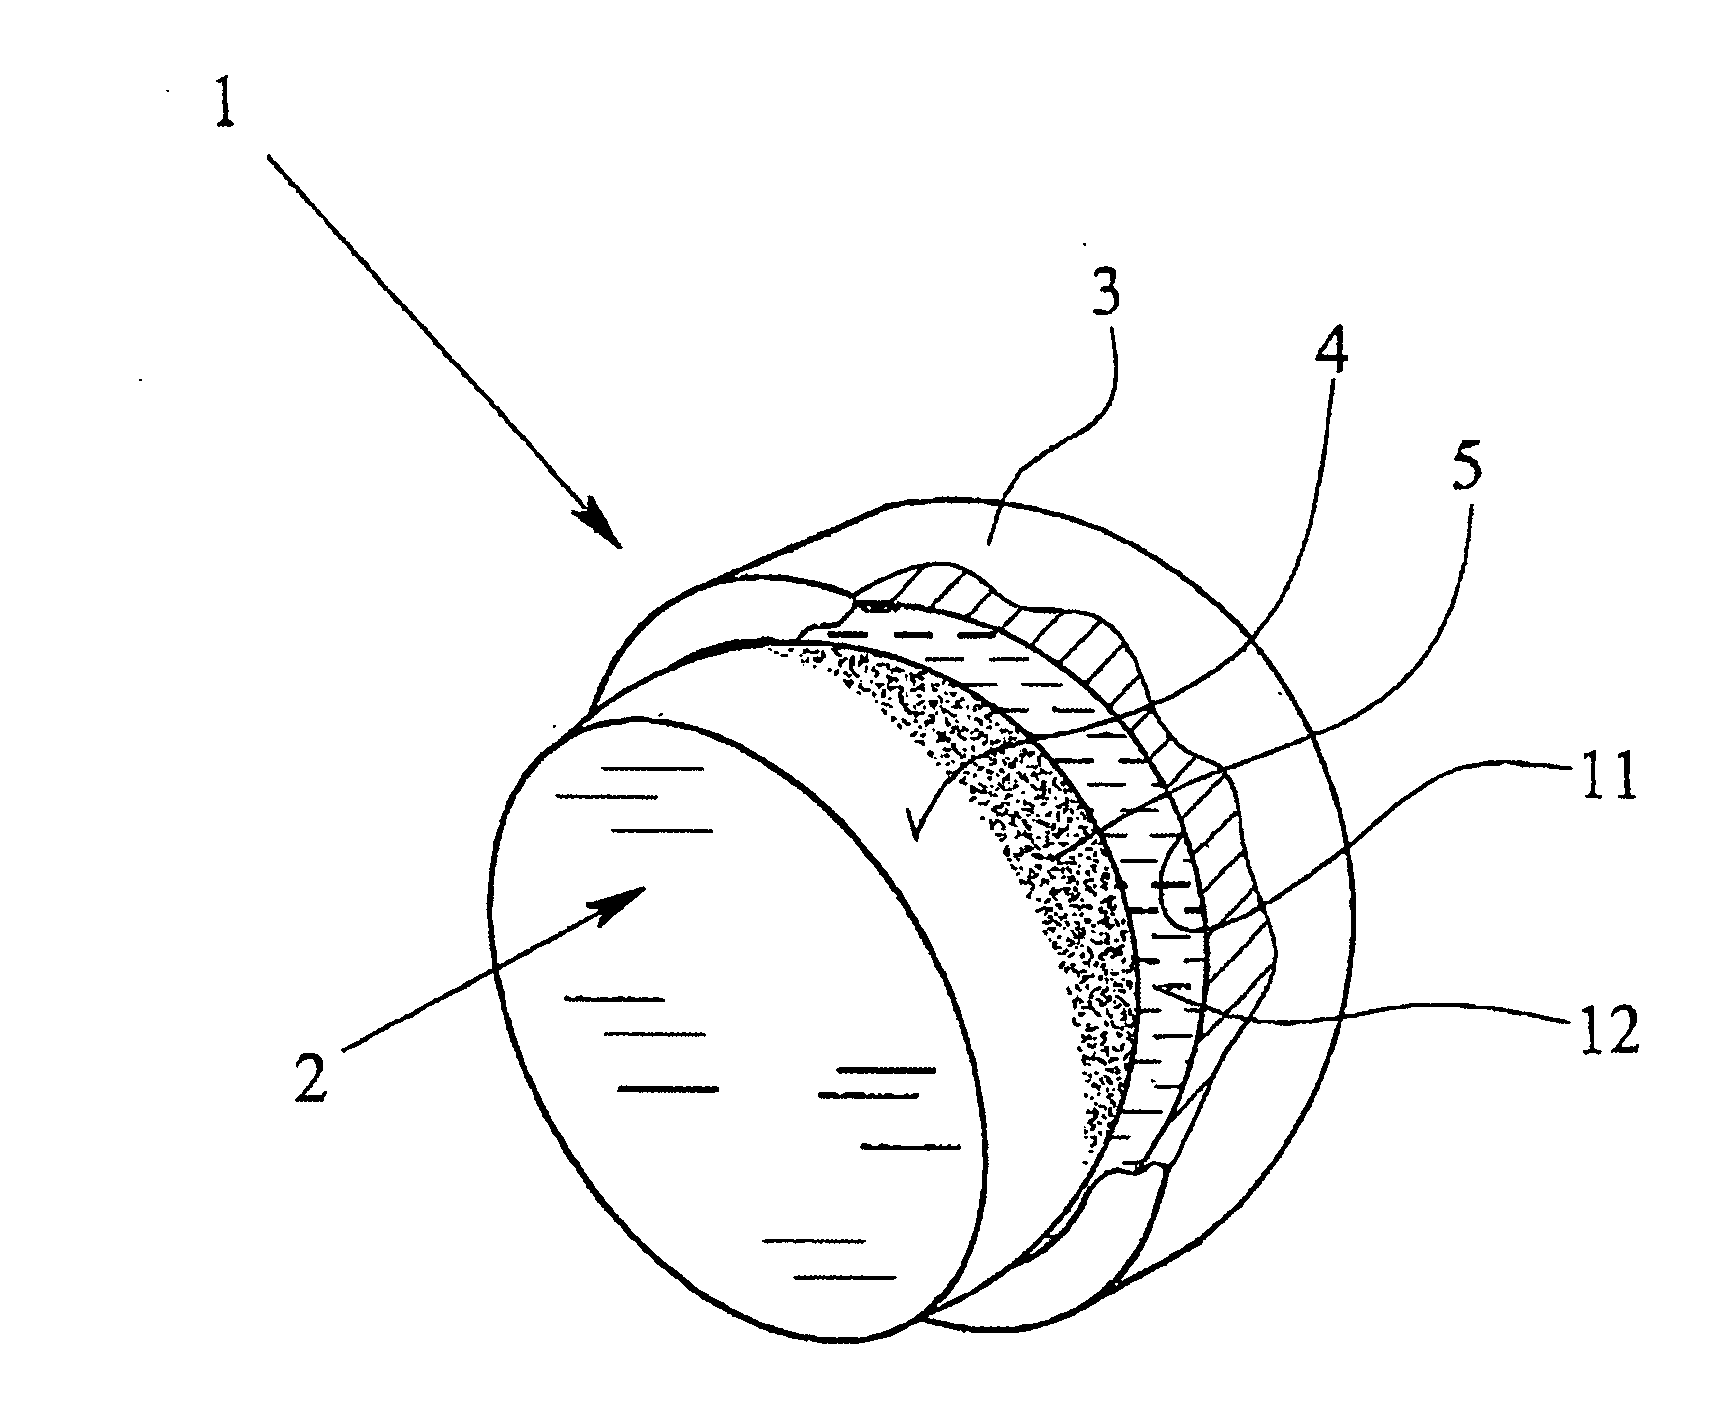 Bearing and composite structure